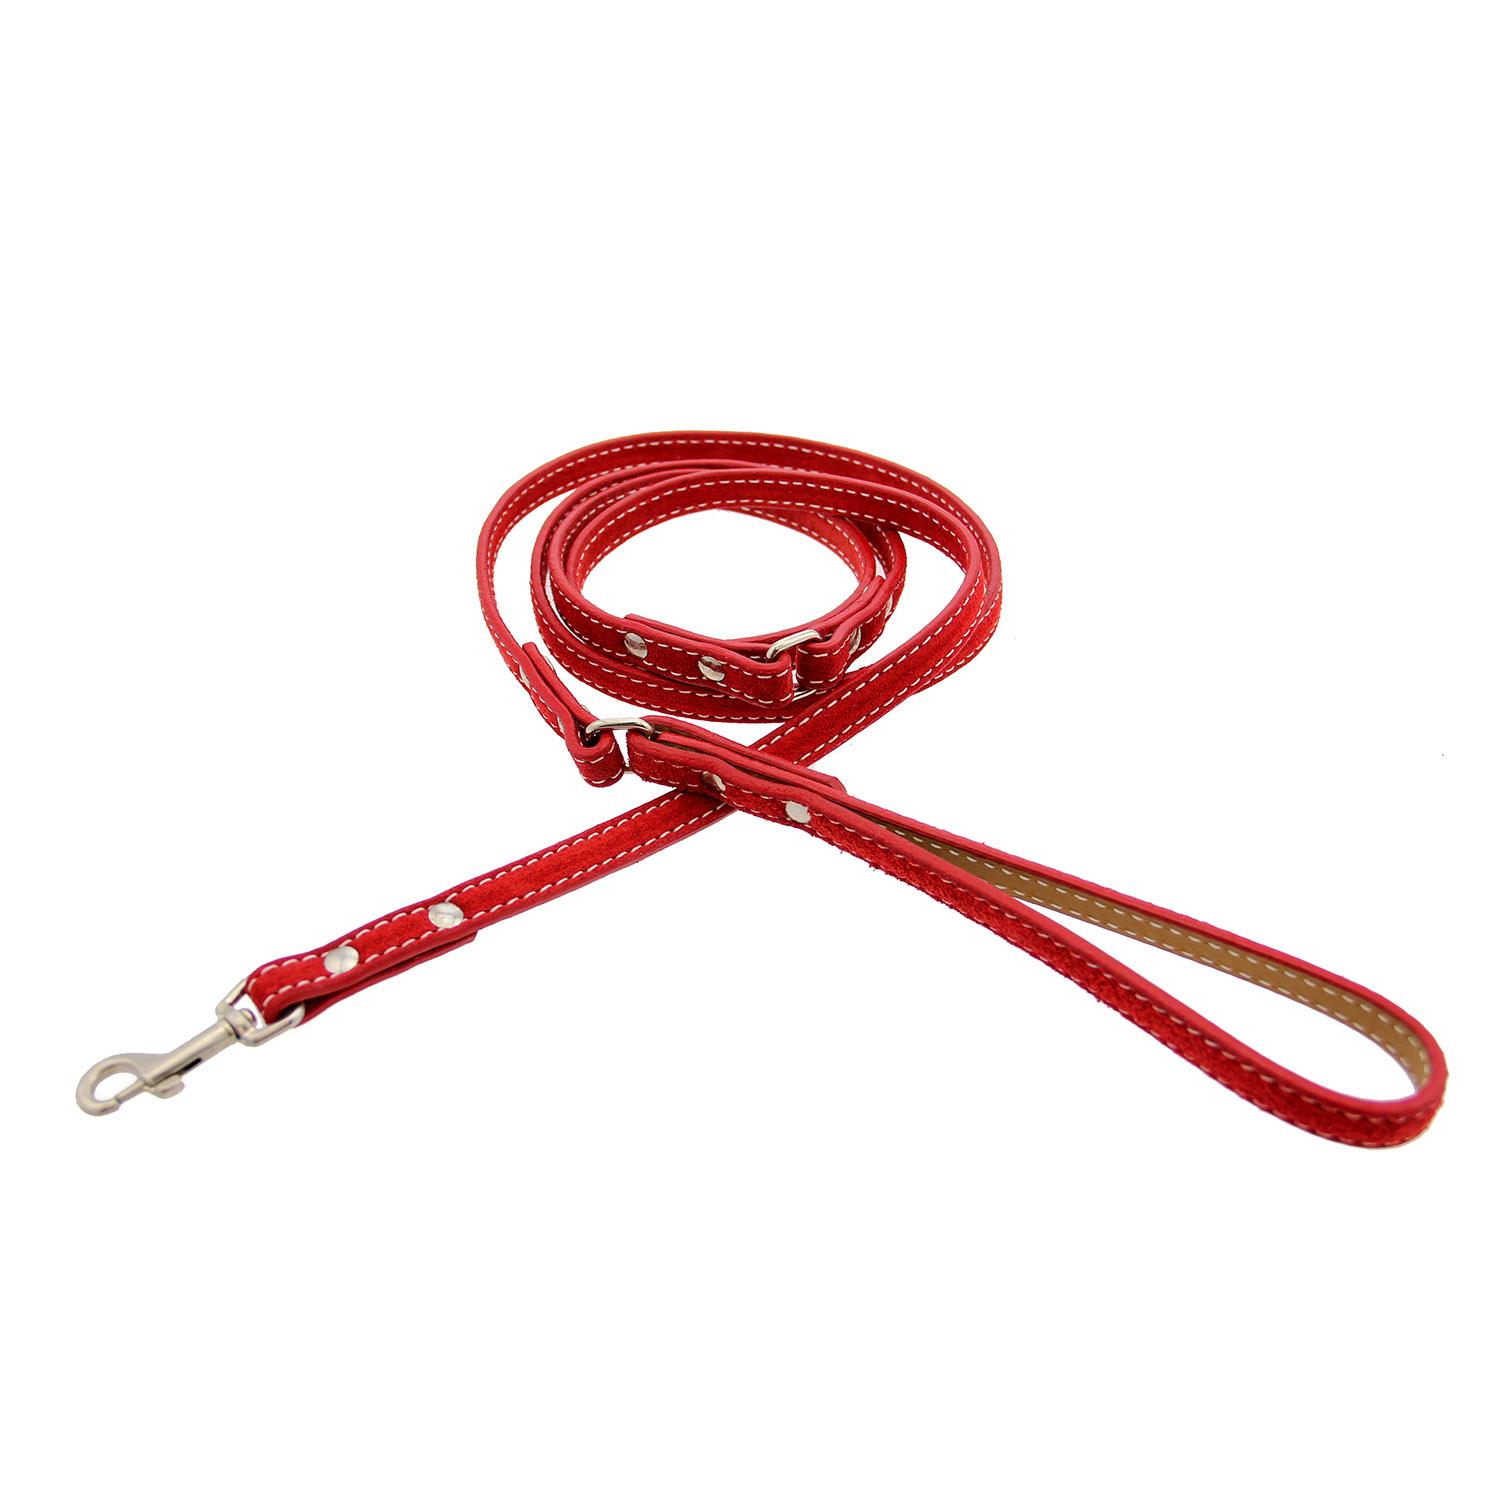 Saratoga Suede Leather Dog Leash by Auburn Leather - Red